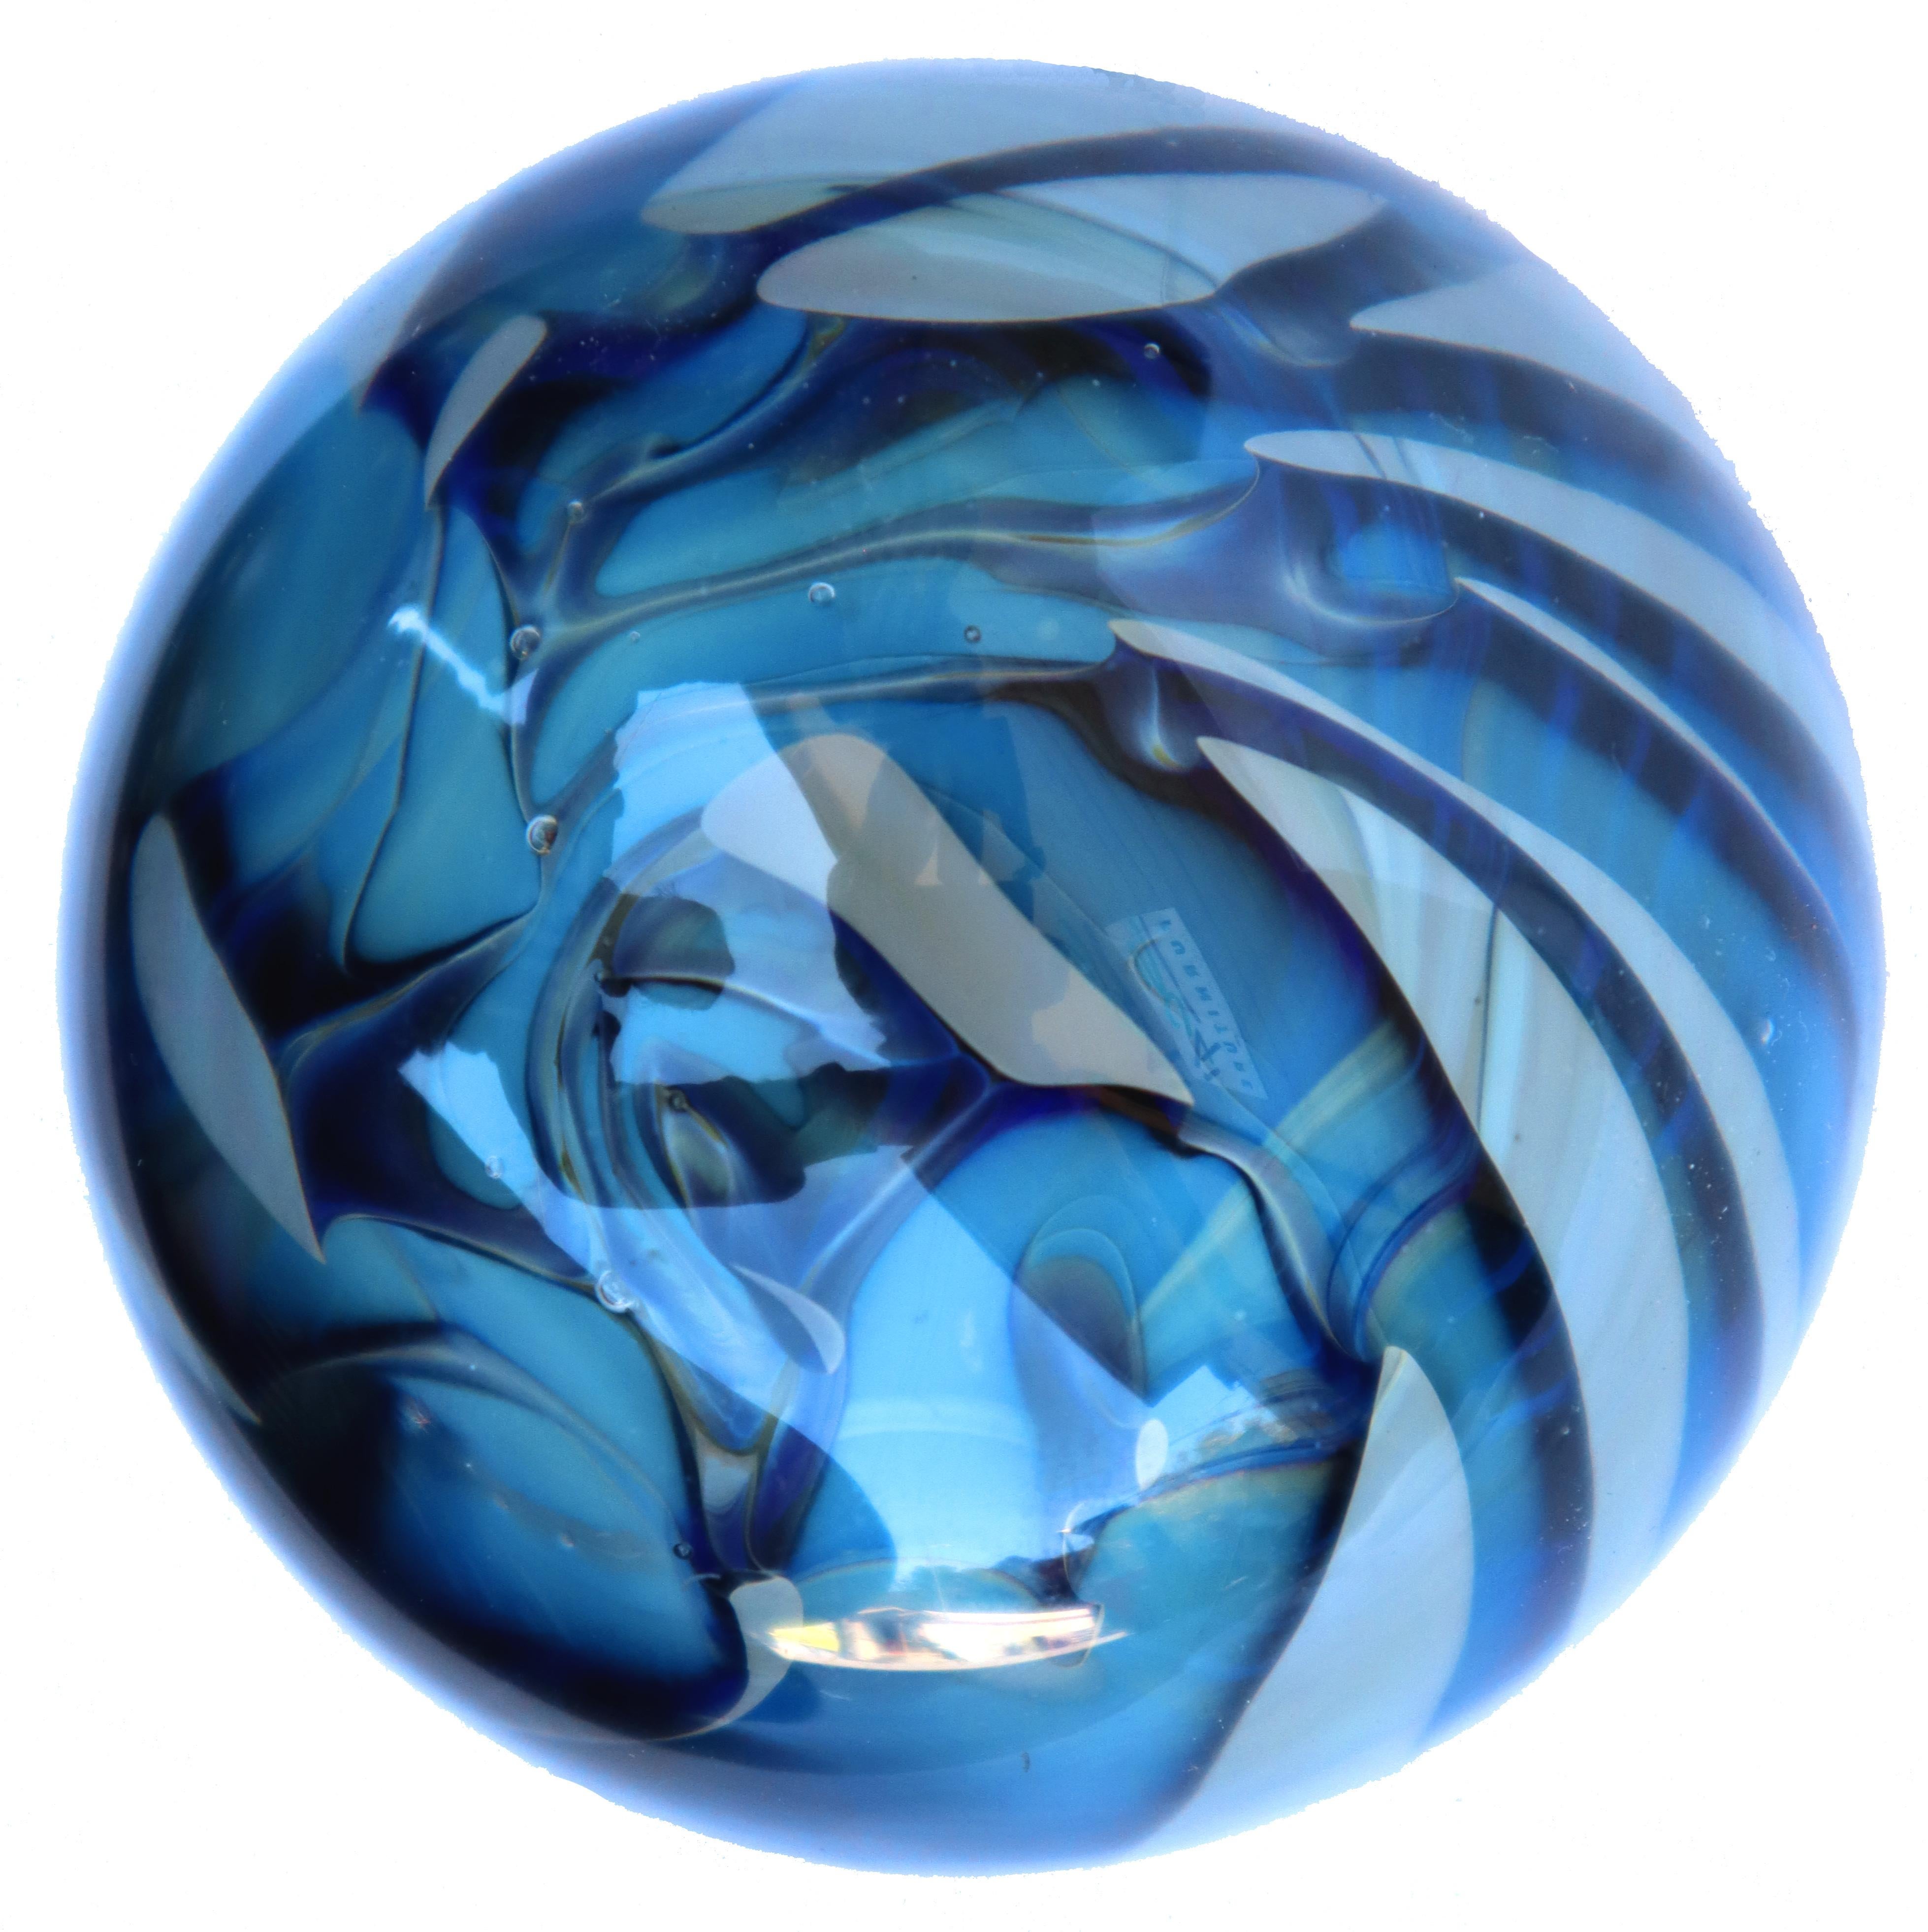 Blue spherical paperweight by Randy Strong (American). Signed and dated 